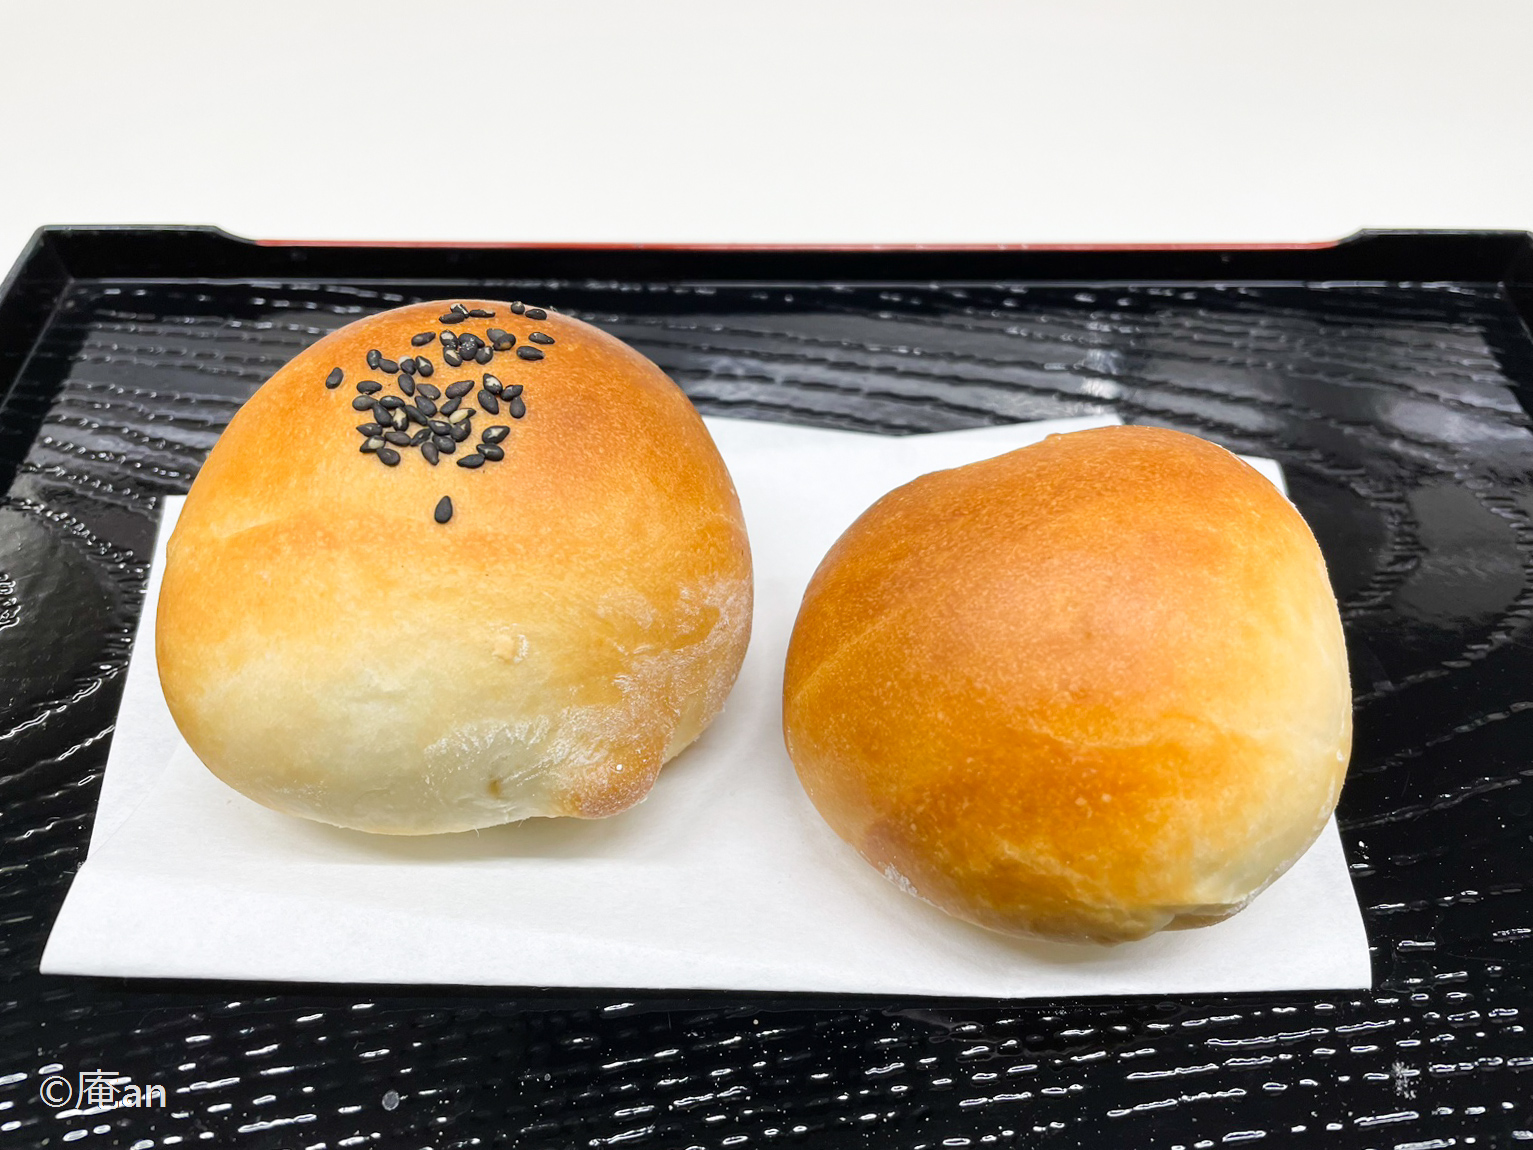 ★Confirmed Plan★Anpan (sweet bean paste bread) making and Tea Ceremony experience